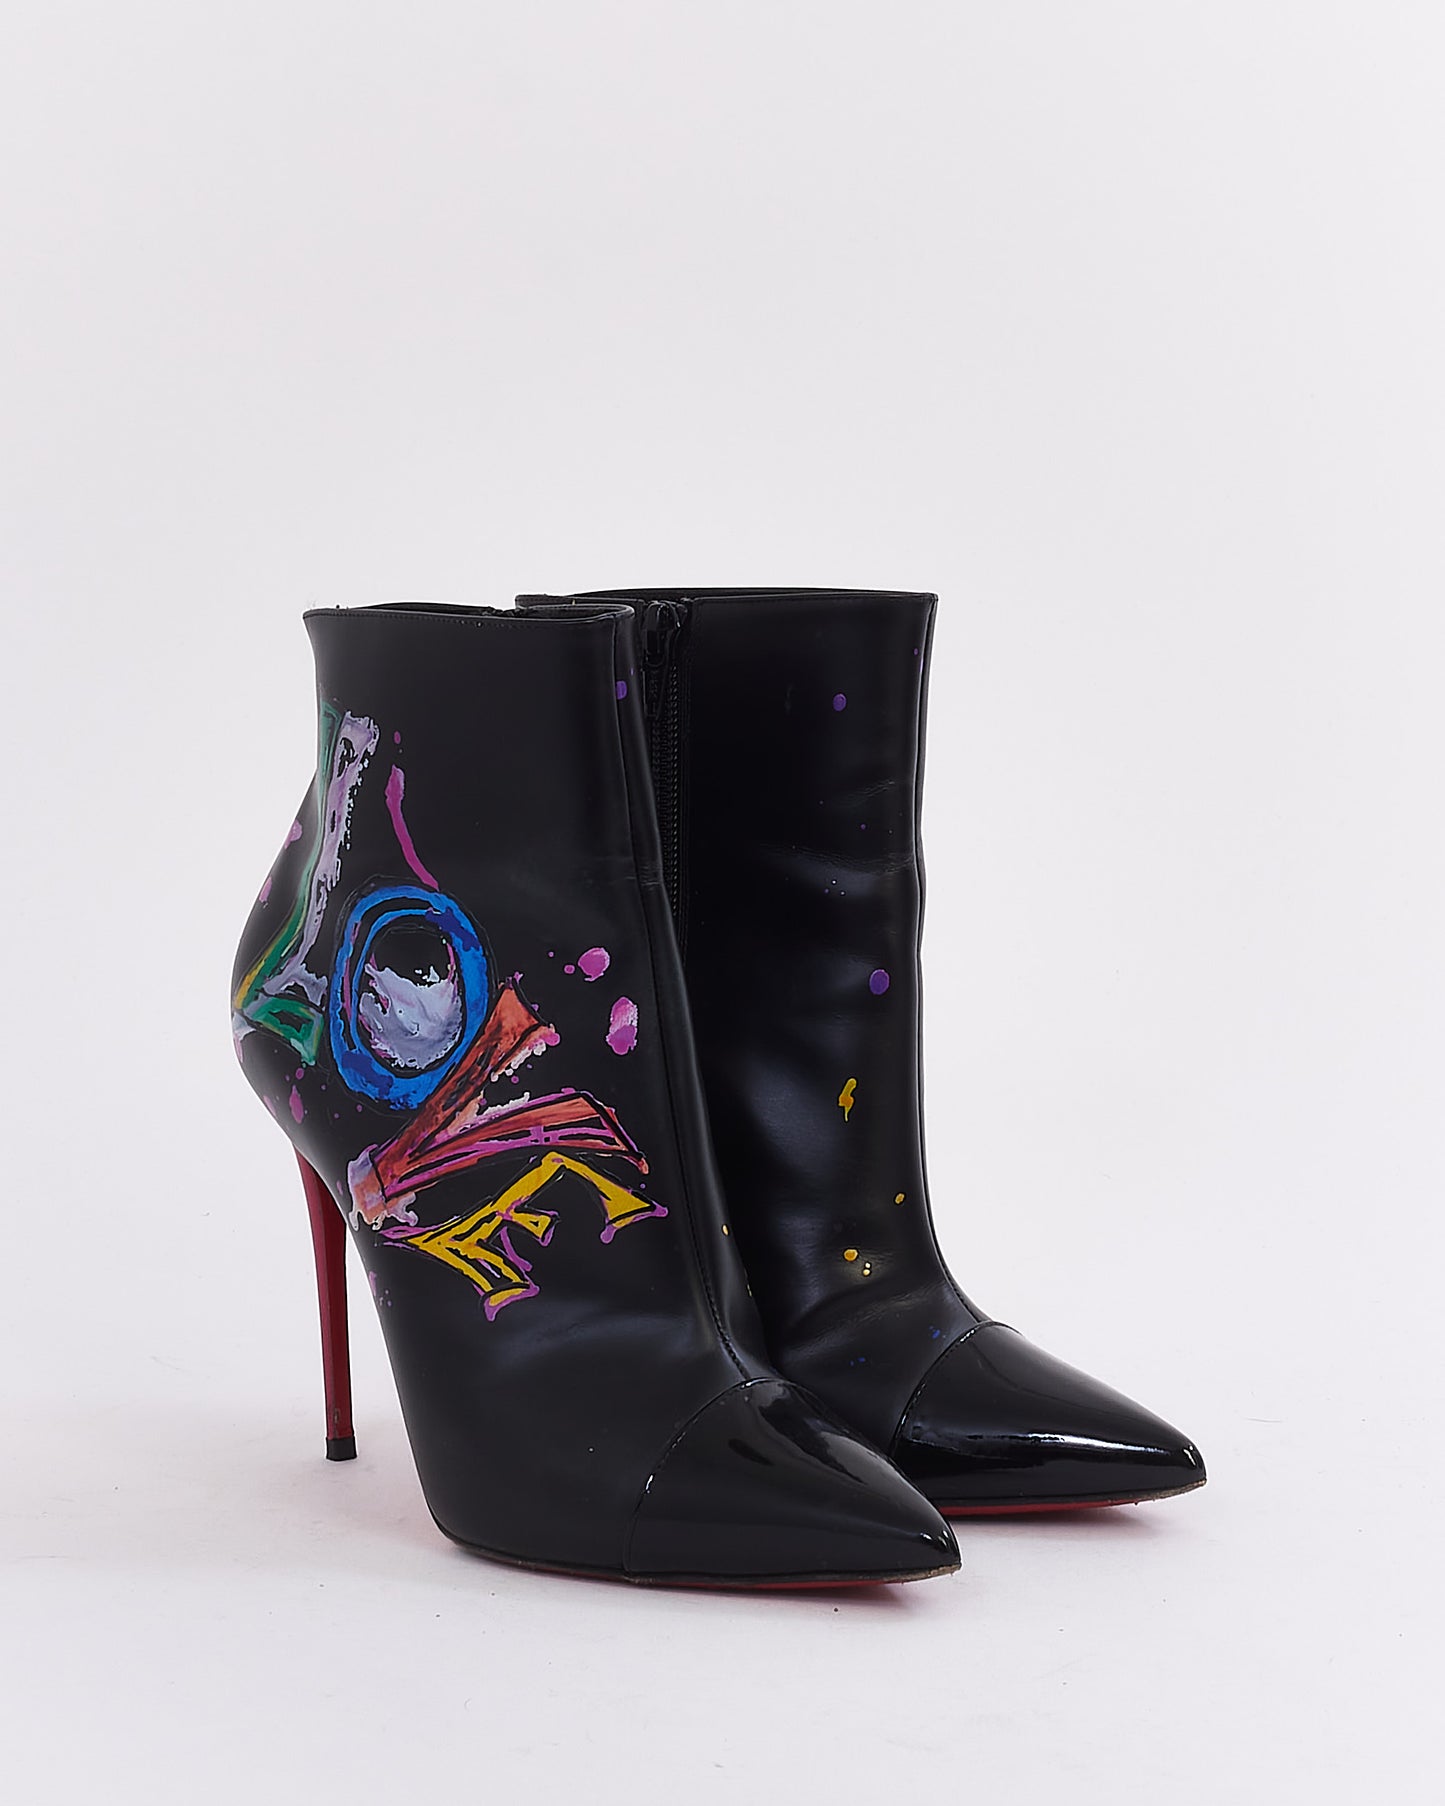 Christian Louboutin Black Leather LOVE So Kate Booty Ankle Boots - 37